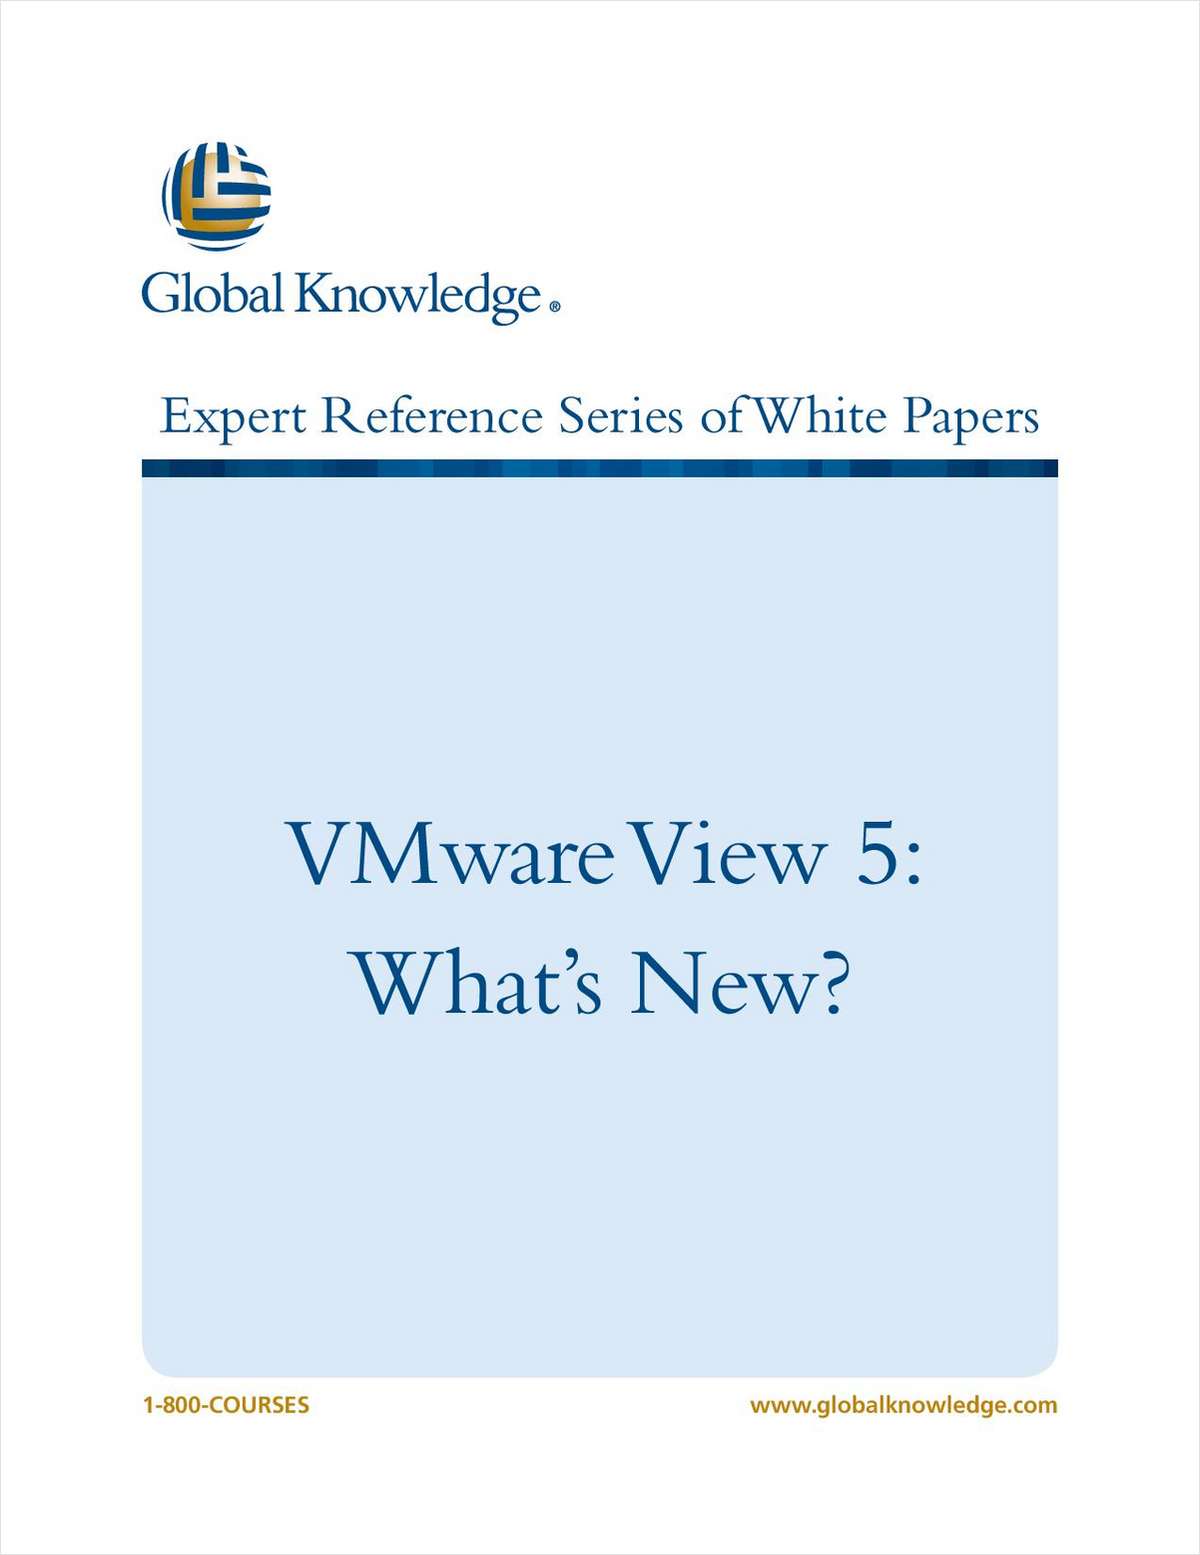 VMware View 5: What's New?